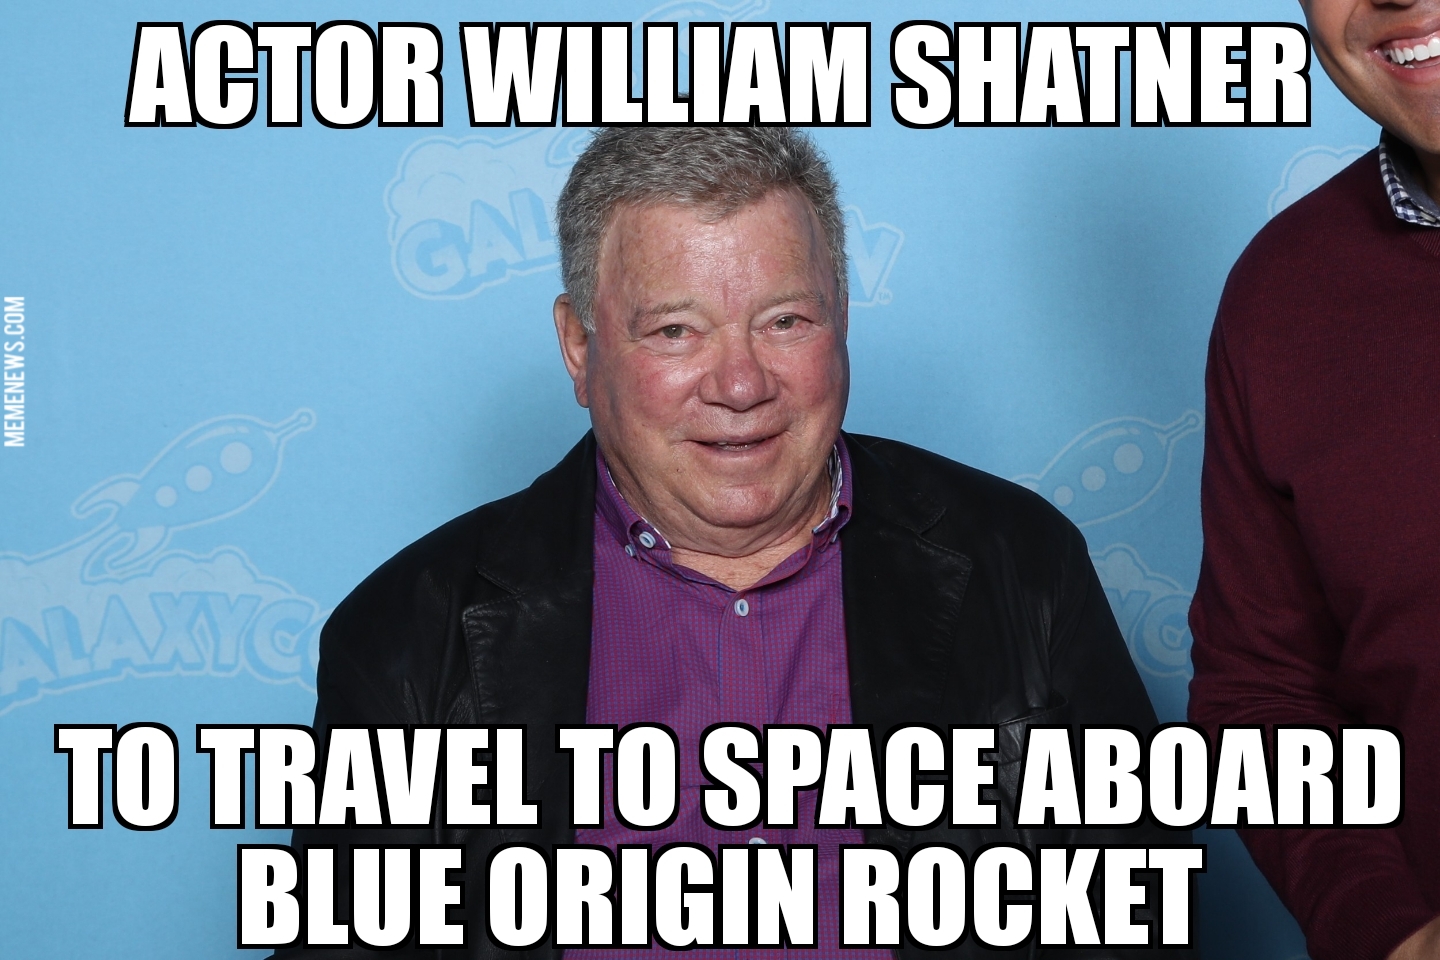 William Shatner to go to space